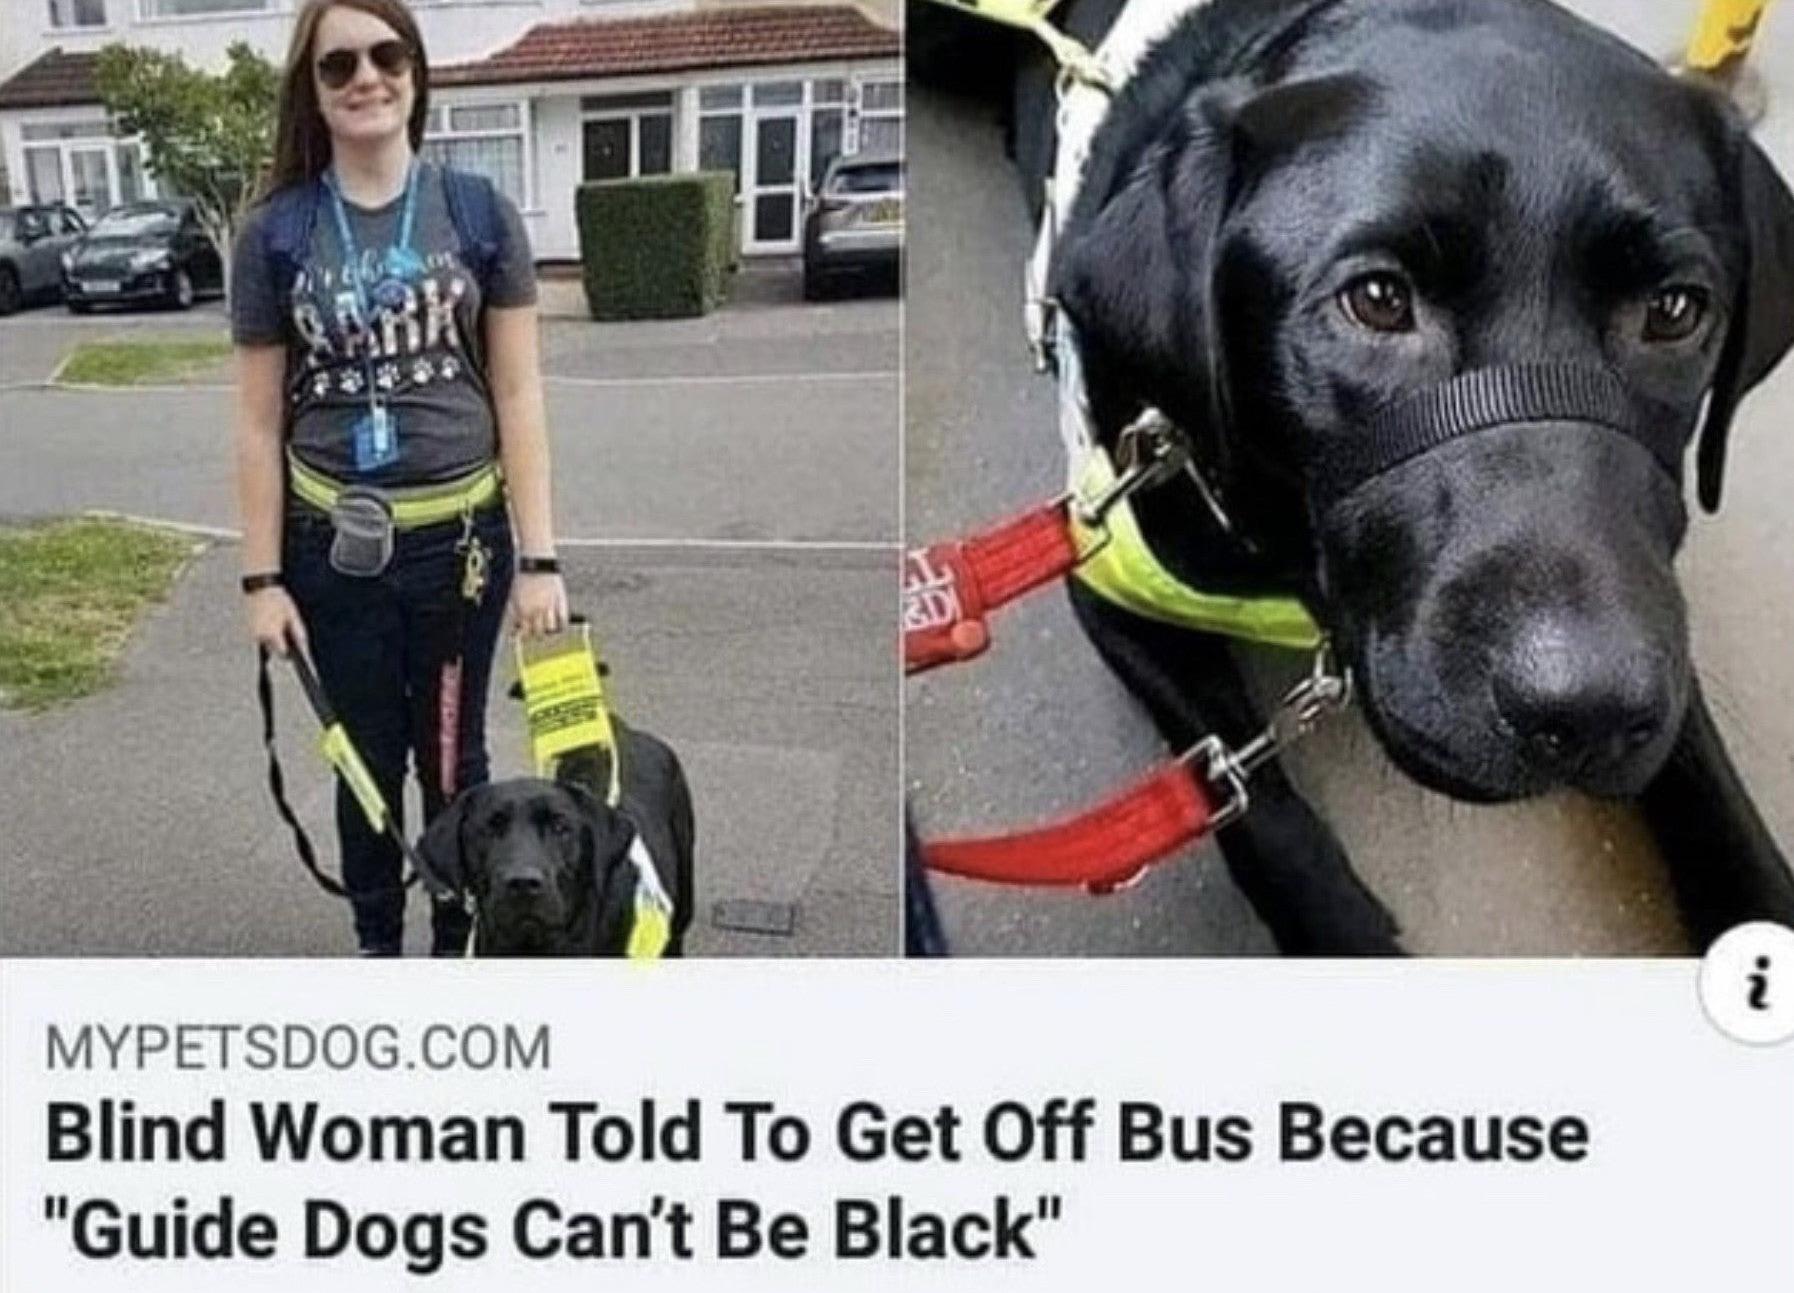 blind woman told to get off bus meme - Mypetsdog.Com Blind Woman Told To Get Off Bus Because "Guide Dogs Can't Be Black"